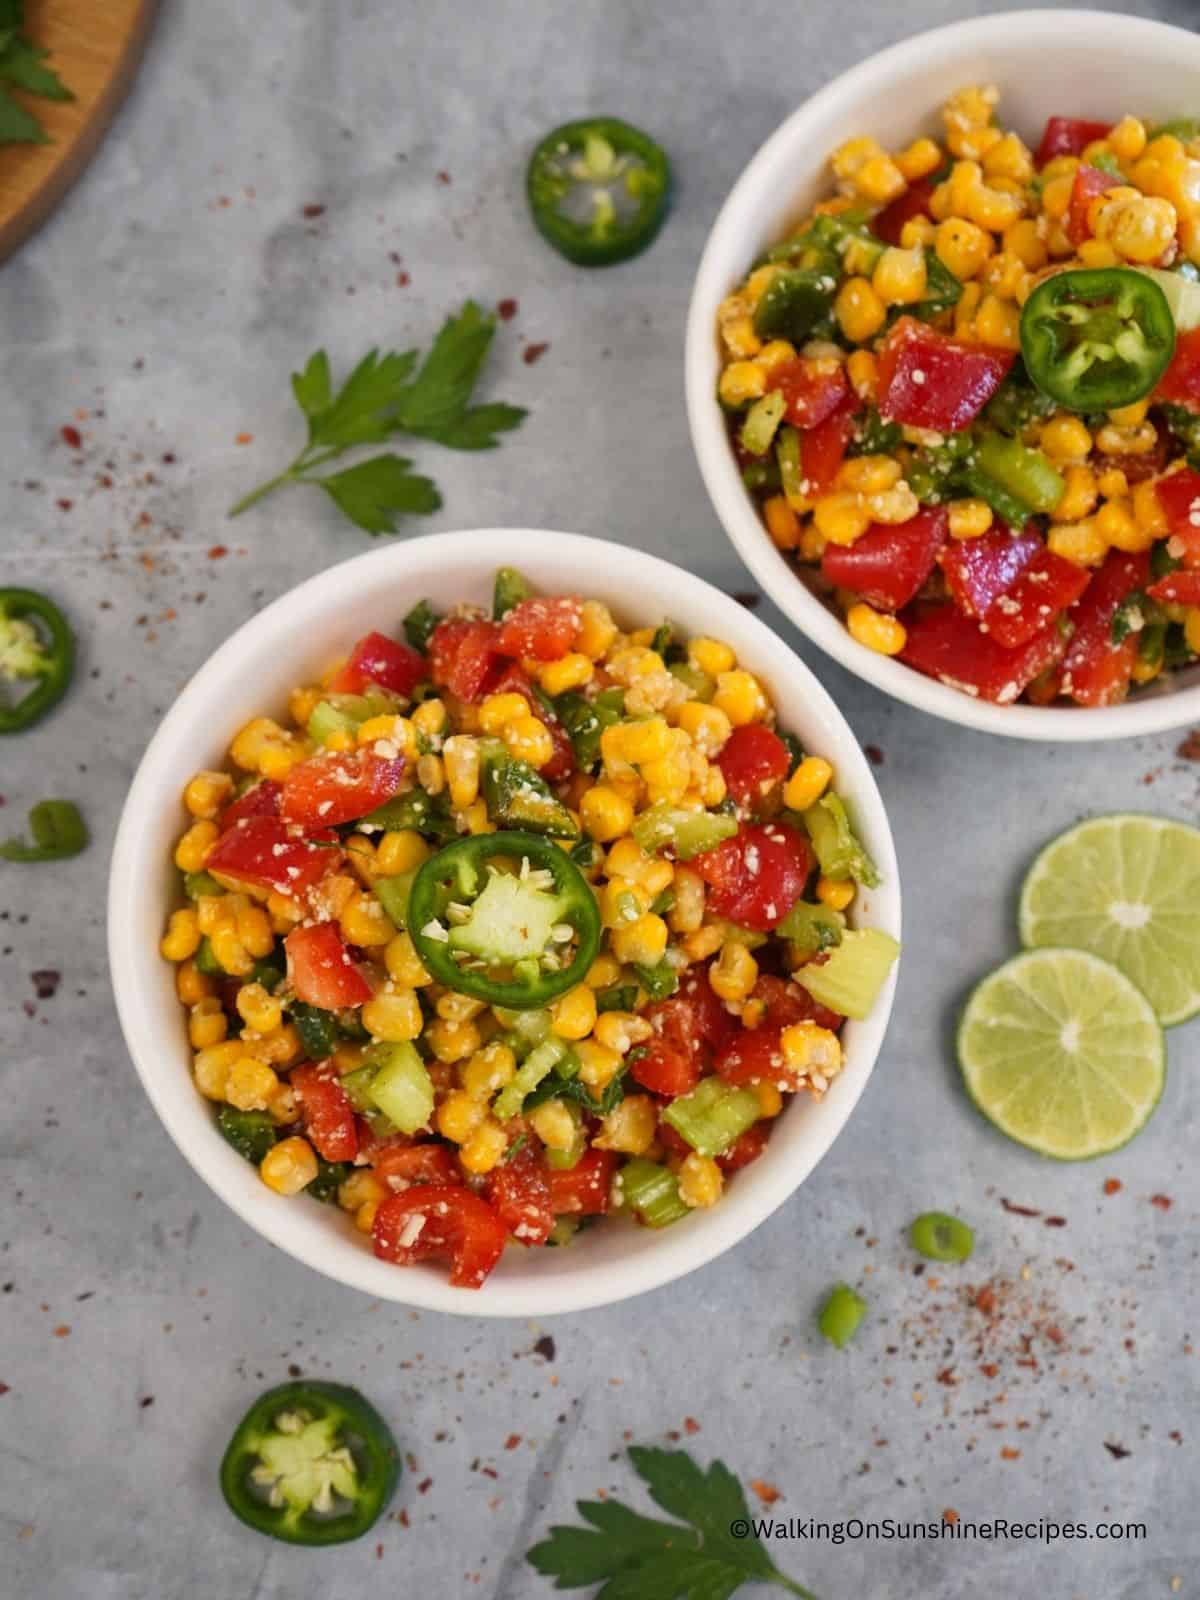 2 bowls of salad with corn, tomatoes, peppers and more.